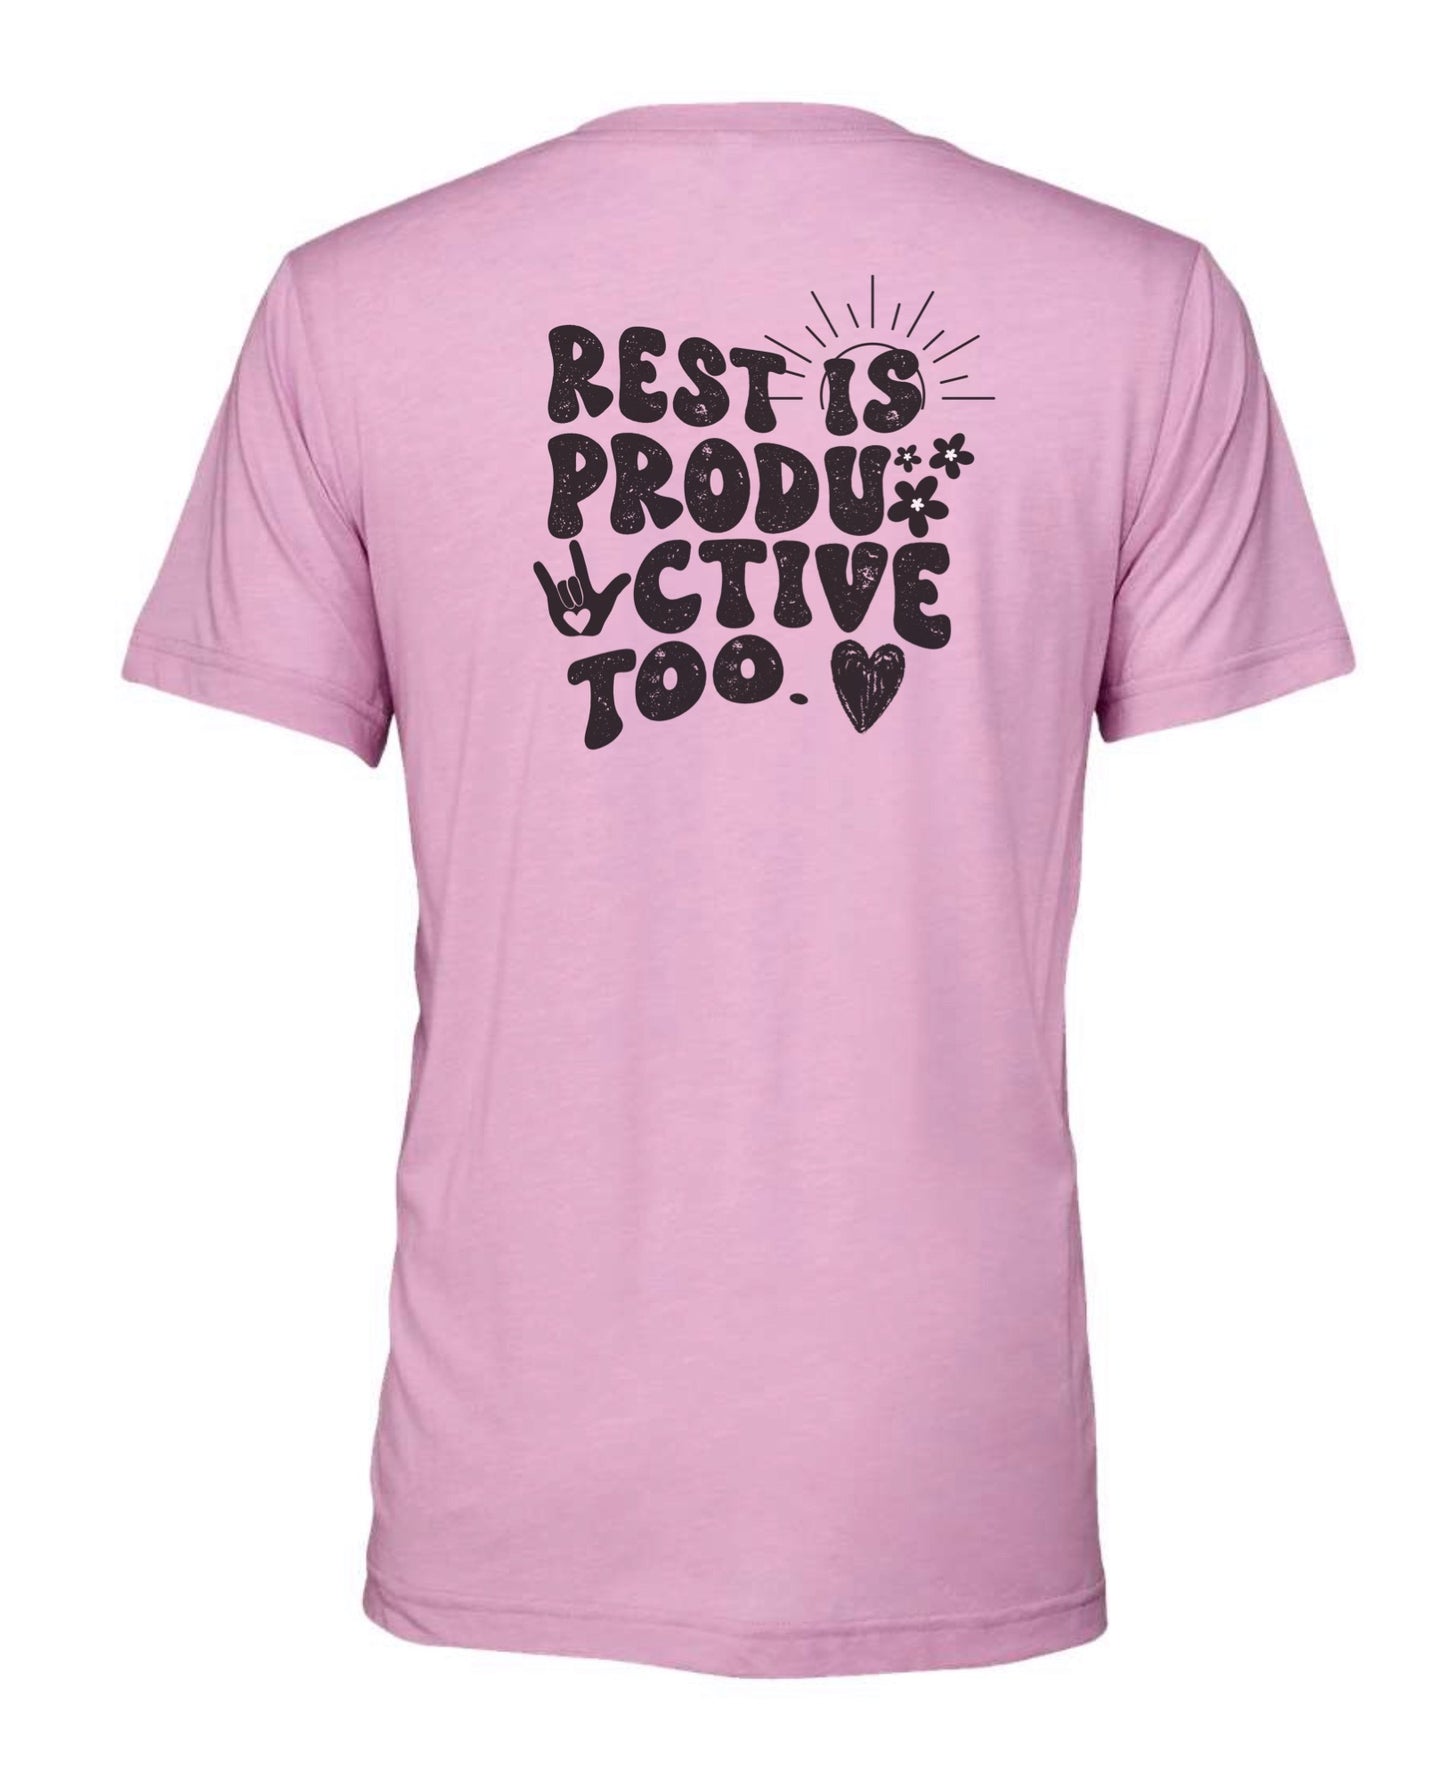 Rest Is Productive Tee *Front & Back Design*